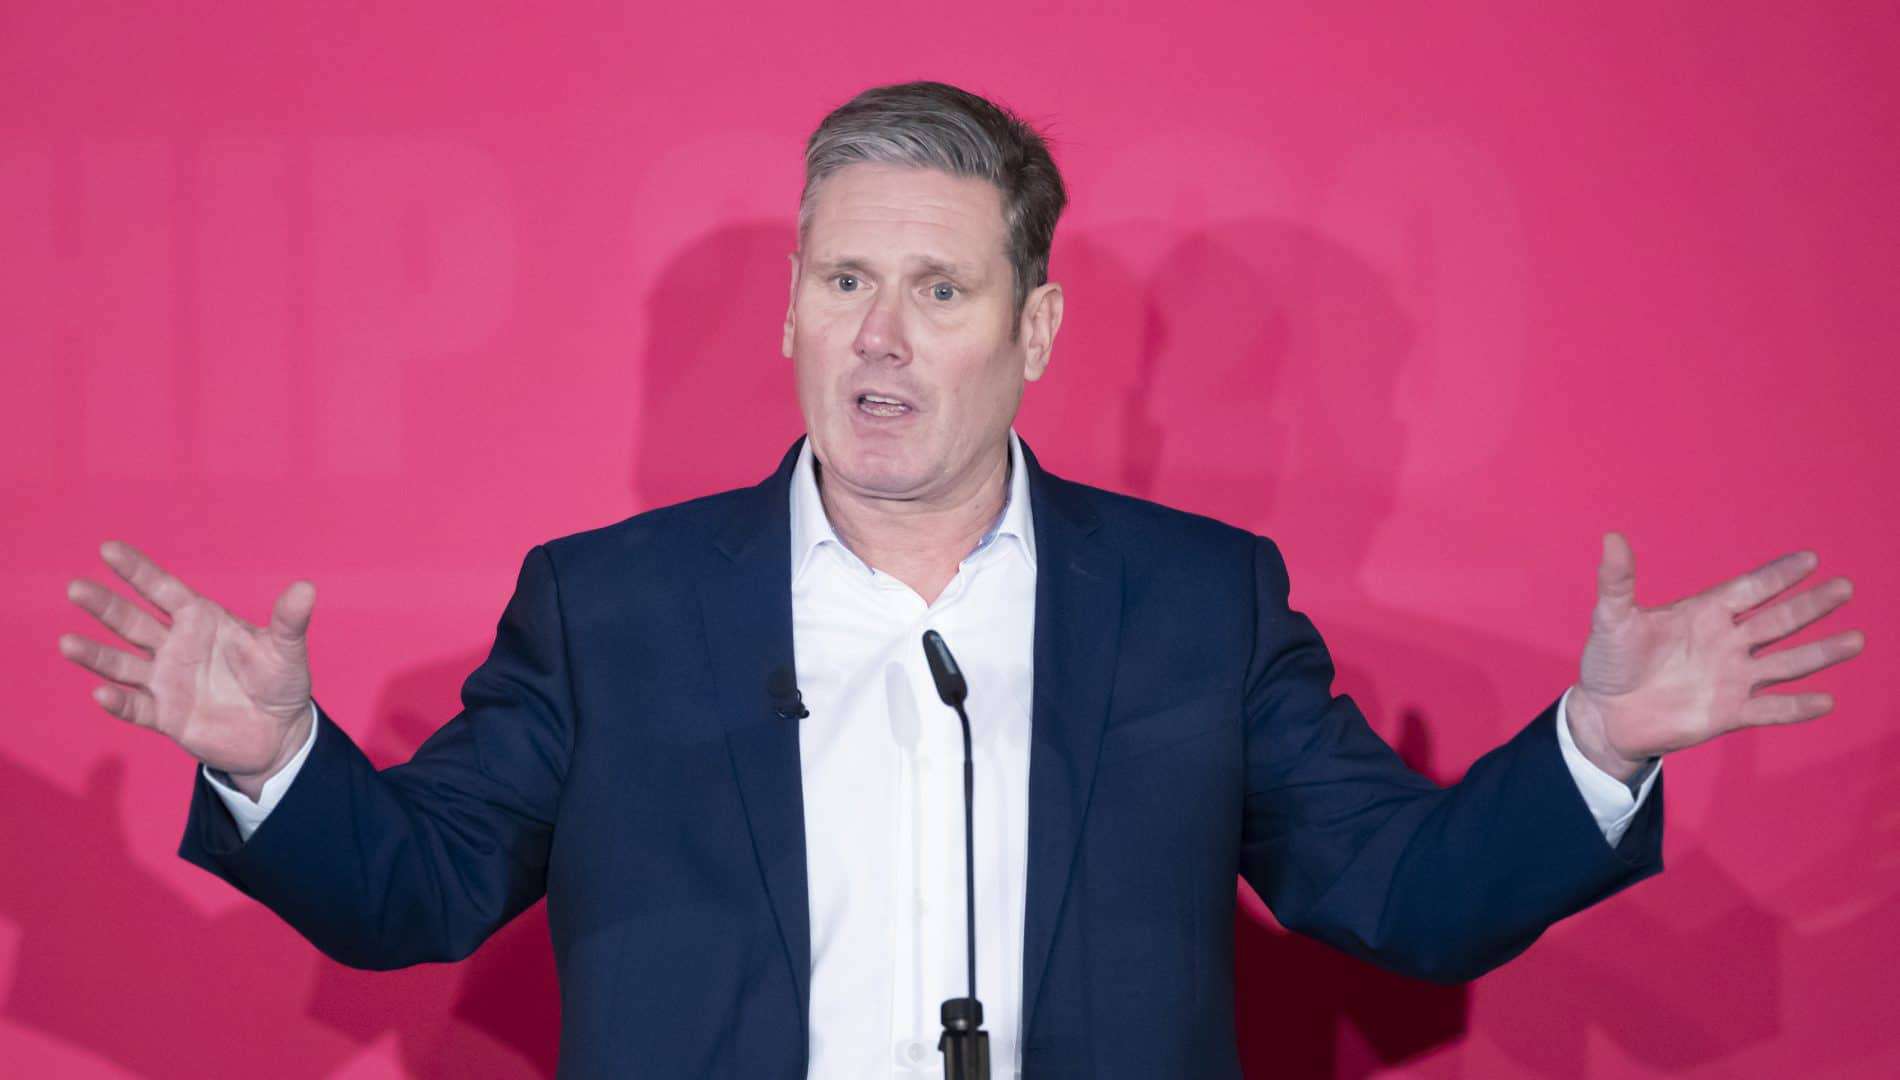 Starmer: “It’s time to reset the relationship between UK Labour and Scottish Labour”